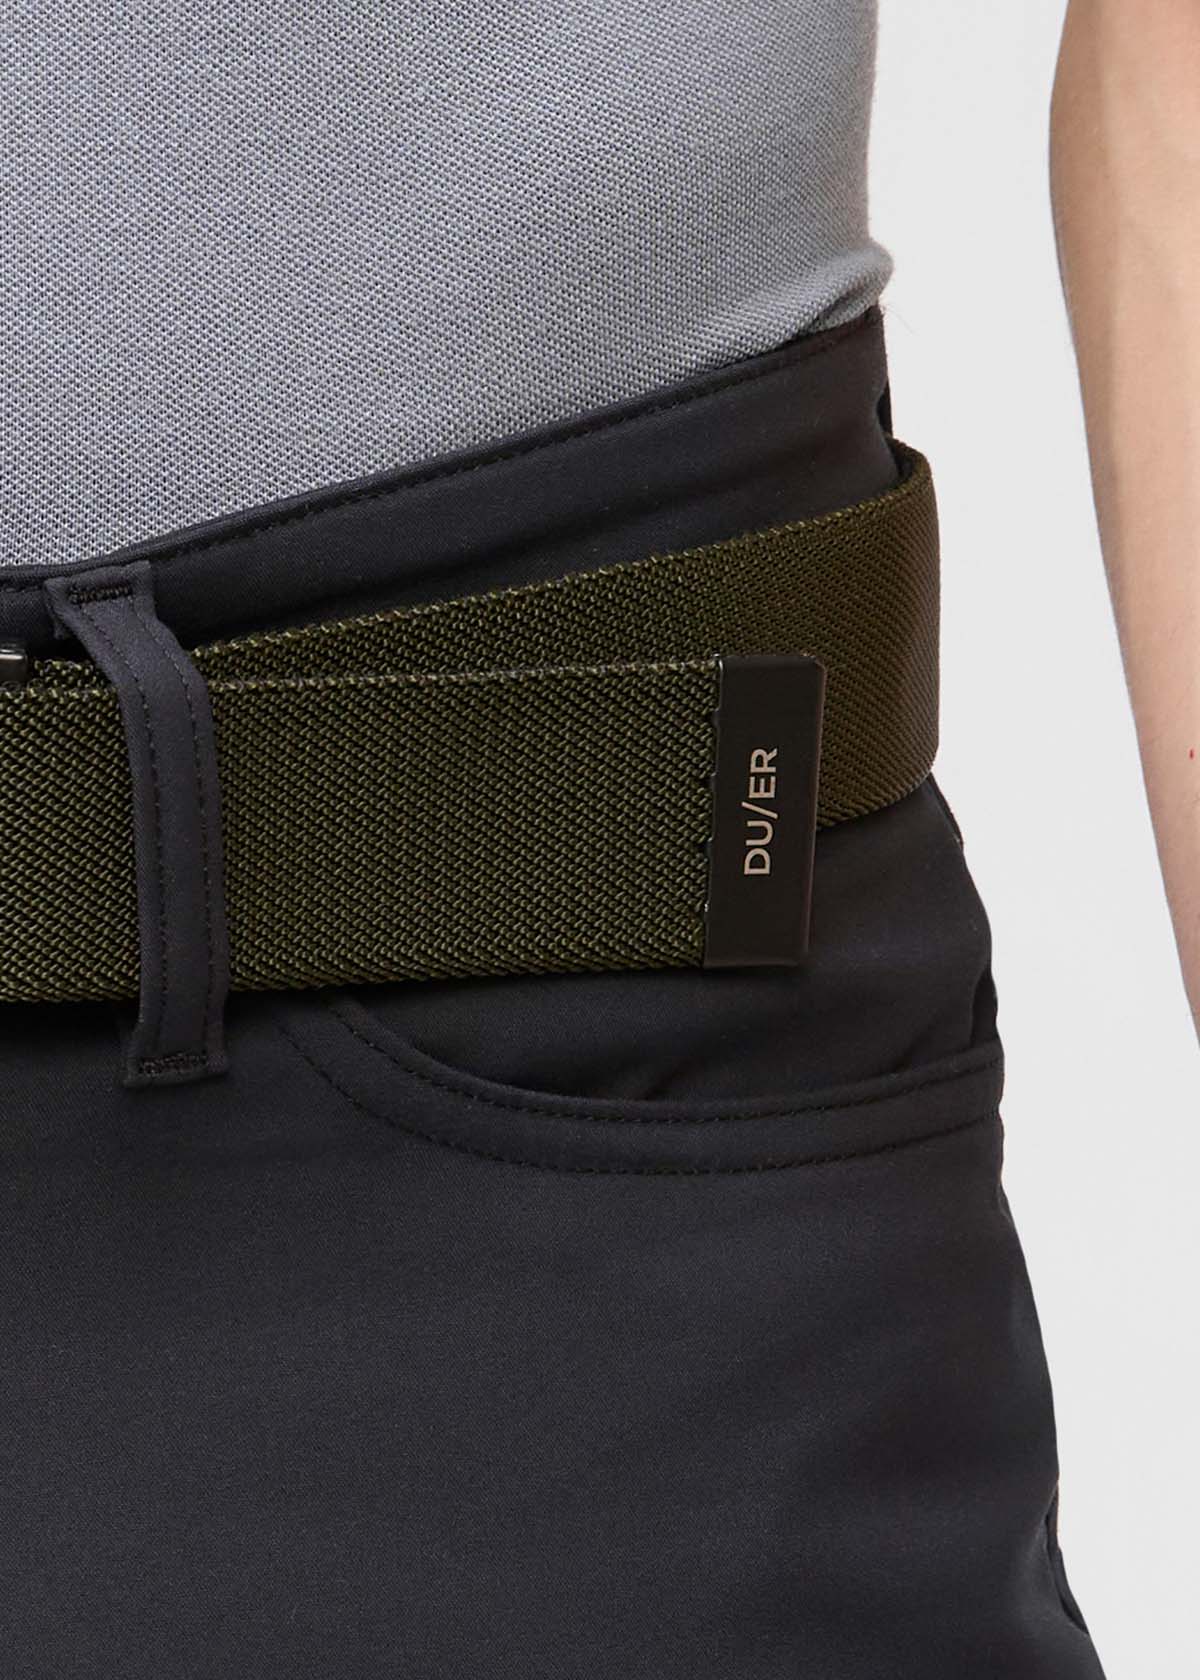 mens black and rmy green reversible stretch belt branded detailing